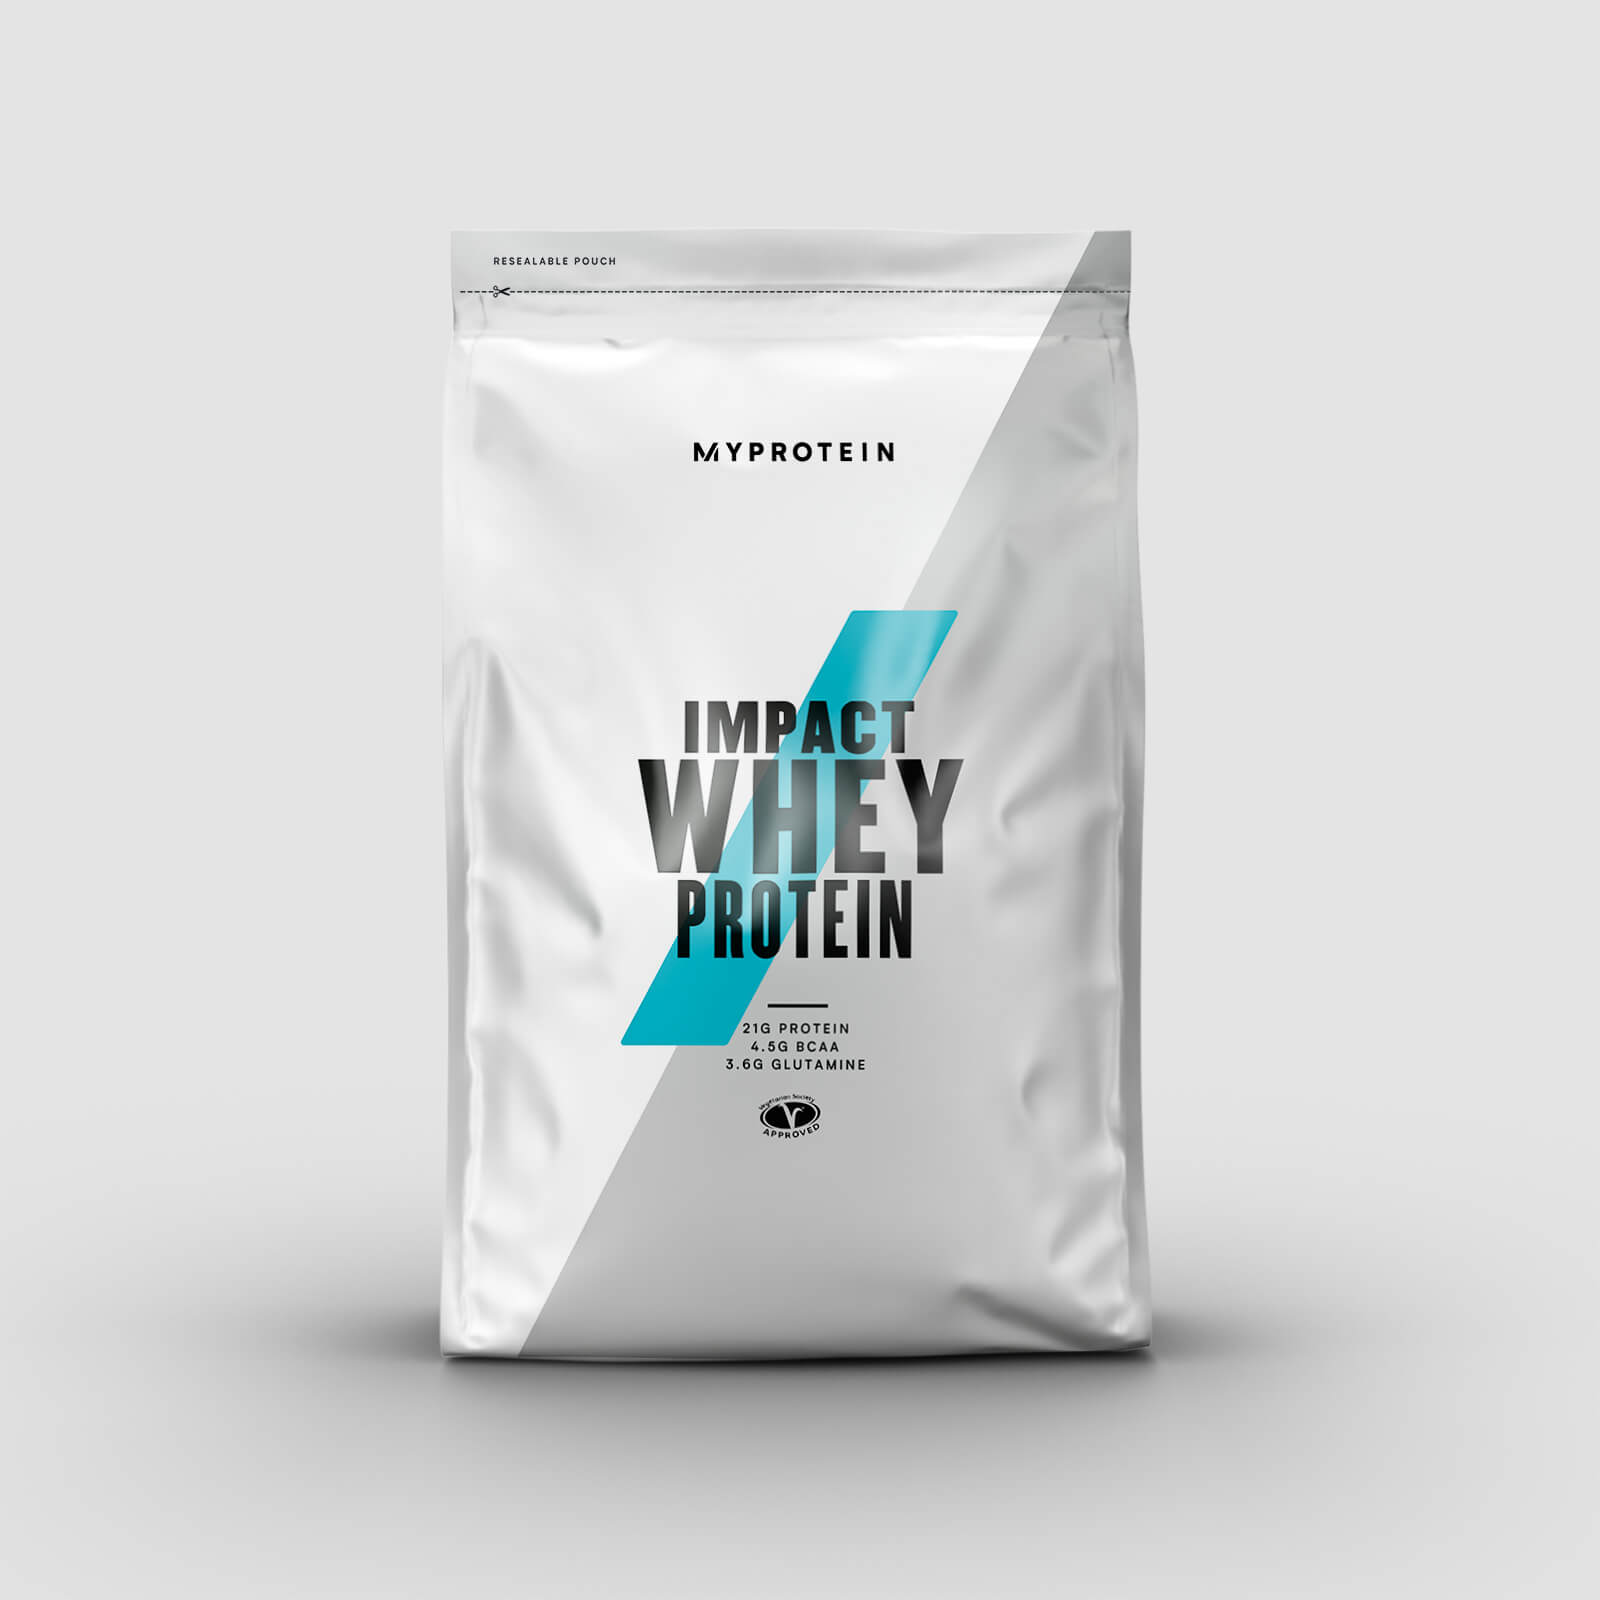 Myprotein Impact Whey Protein - 2.5kg - Chocolate Coconut - New and Improved